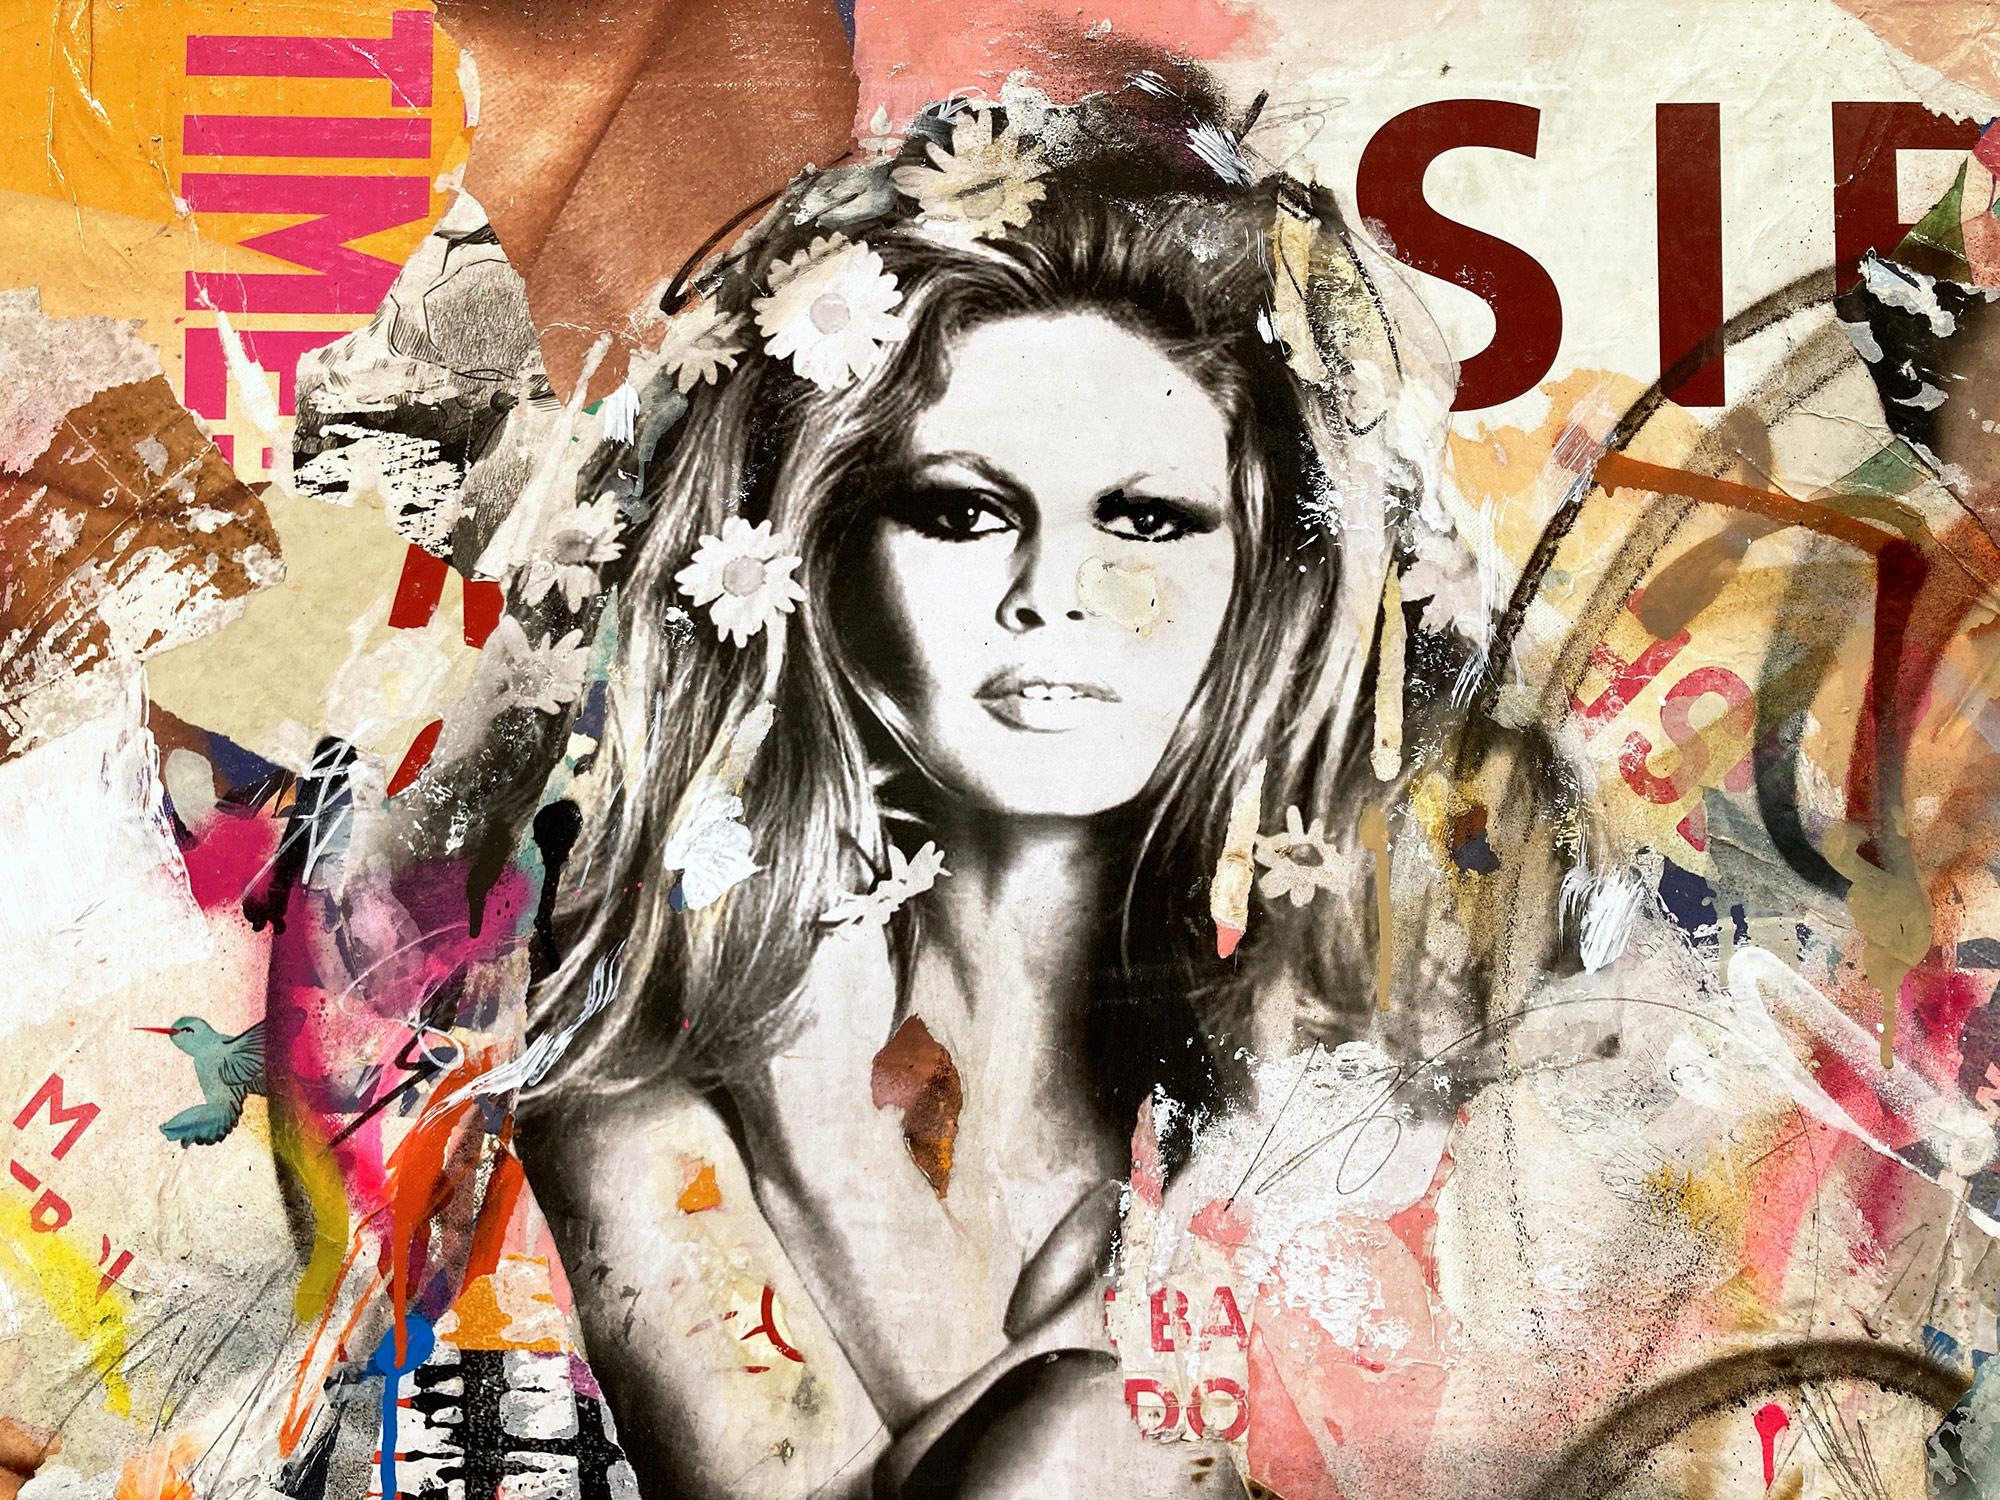 This piece depicts famous French actress and model Brigitte Bardot. Done with beautiful expressive colors and a distinctive street art design, this piece pops with energy and romantic beauty. Its composition and bold collage make a wonderful